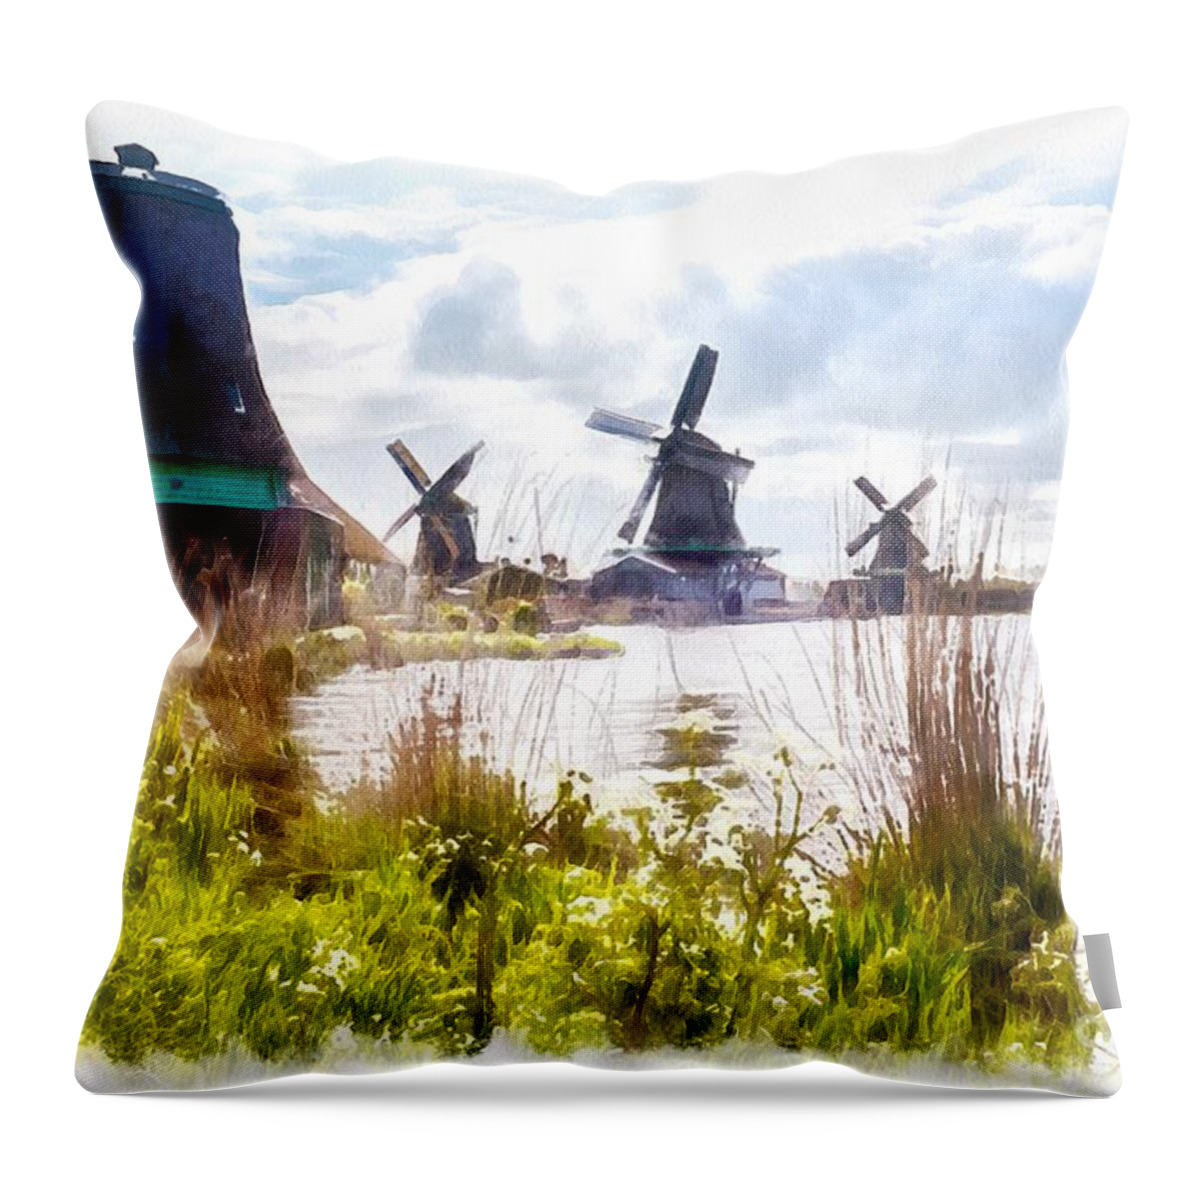 Windmills Throw Pillow featuring the photograph Windmills by Eva Lechner